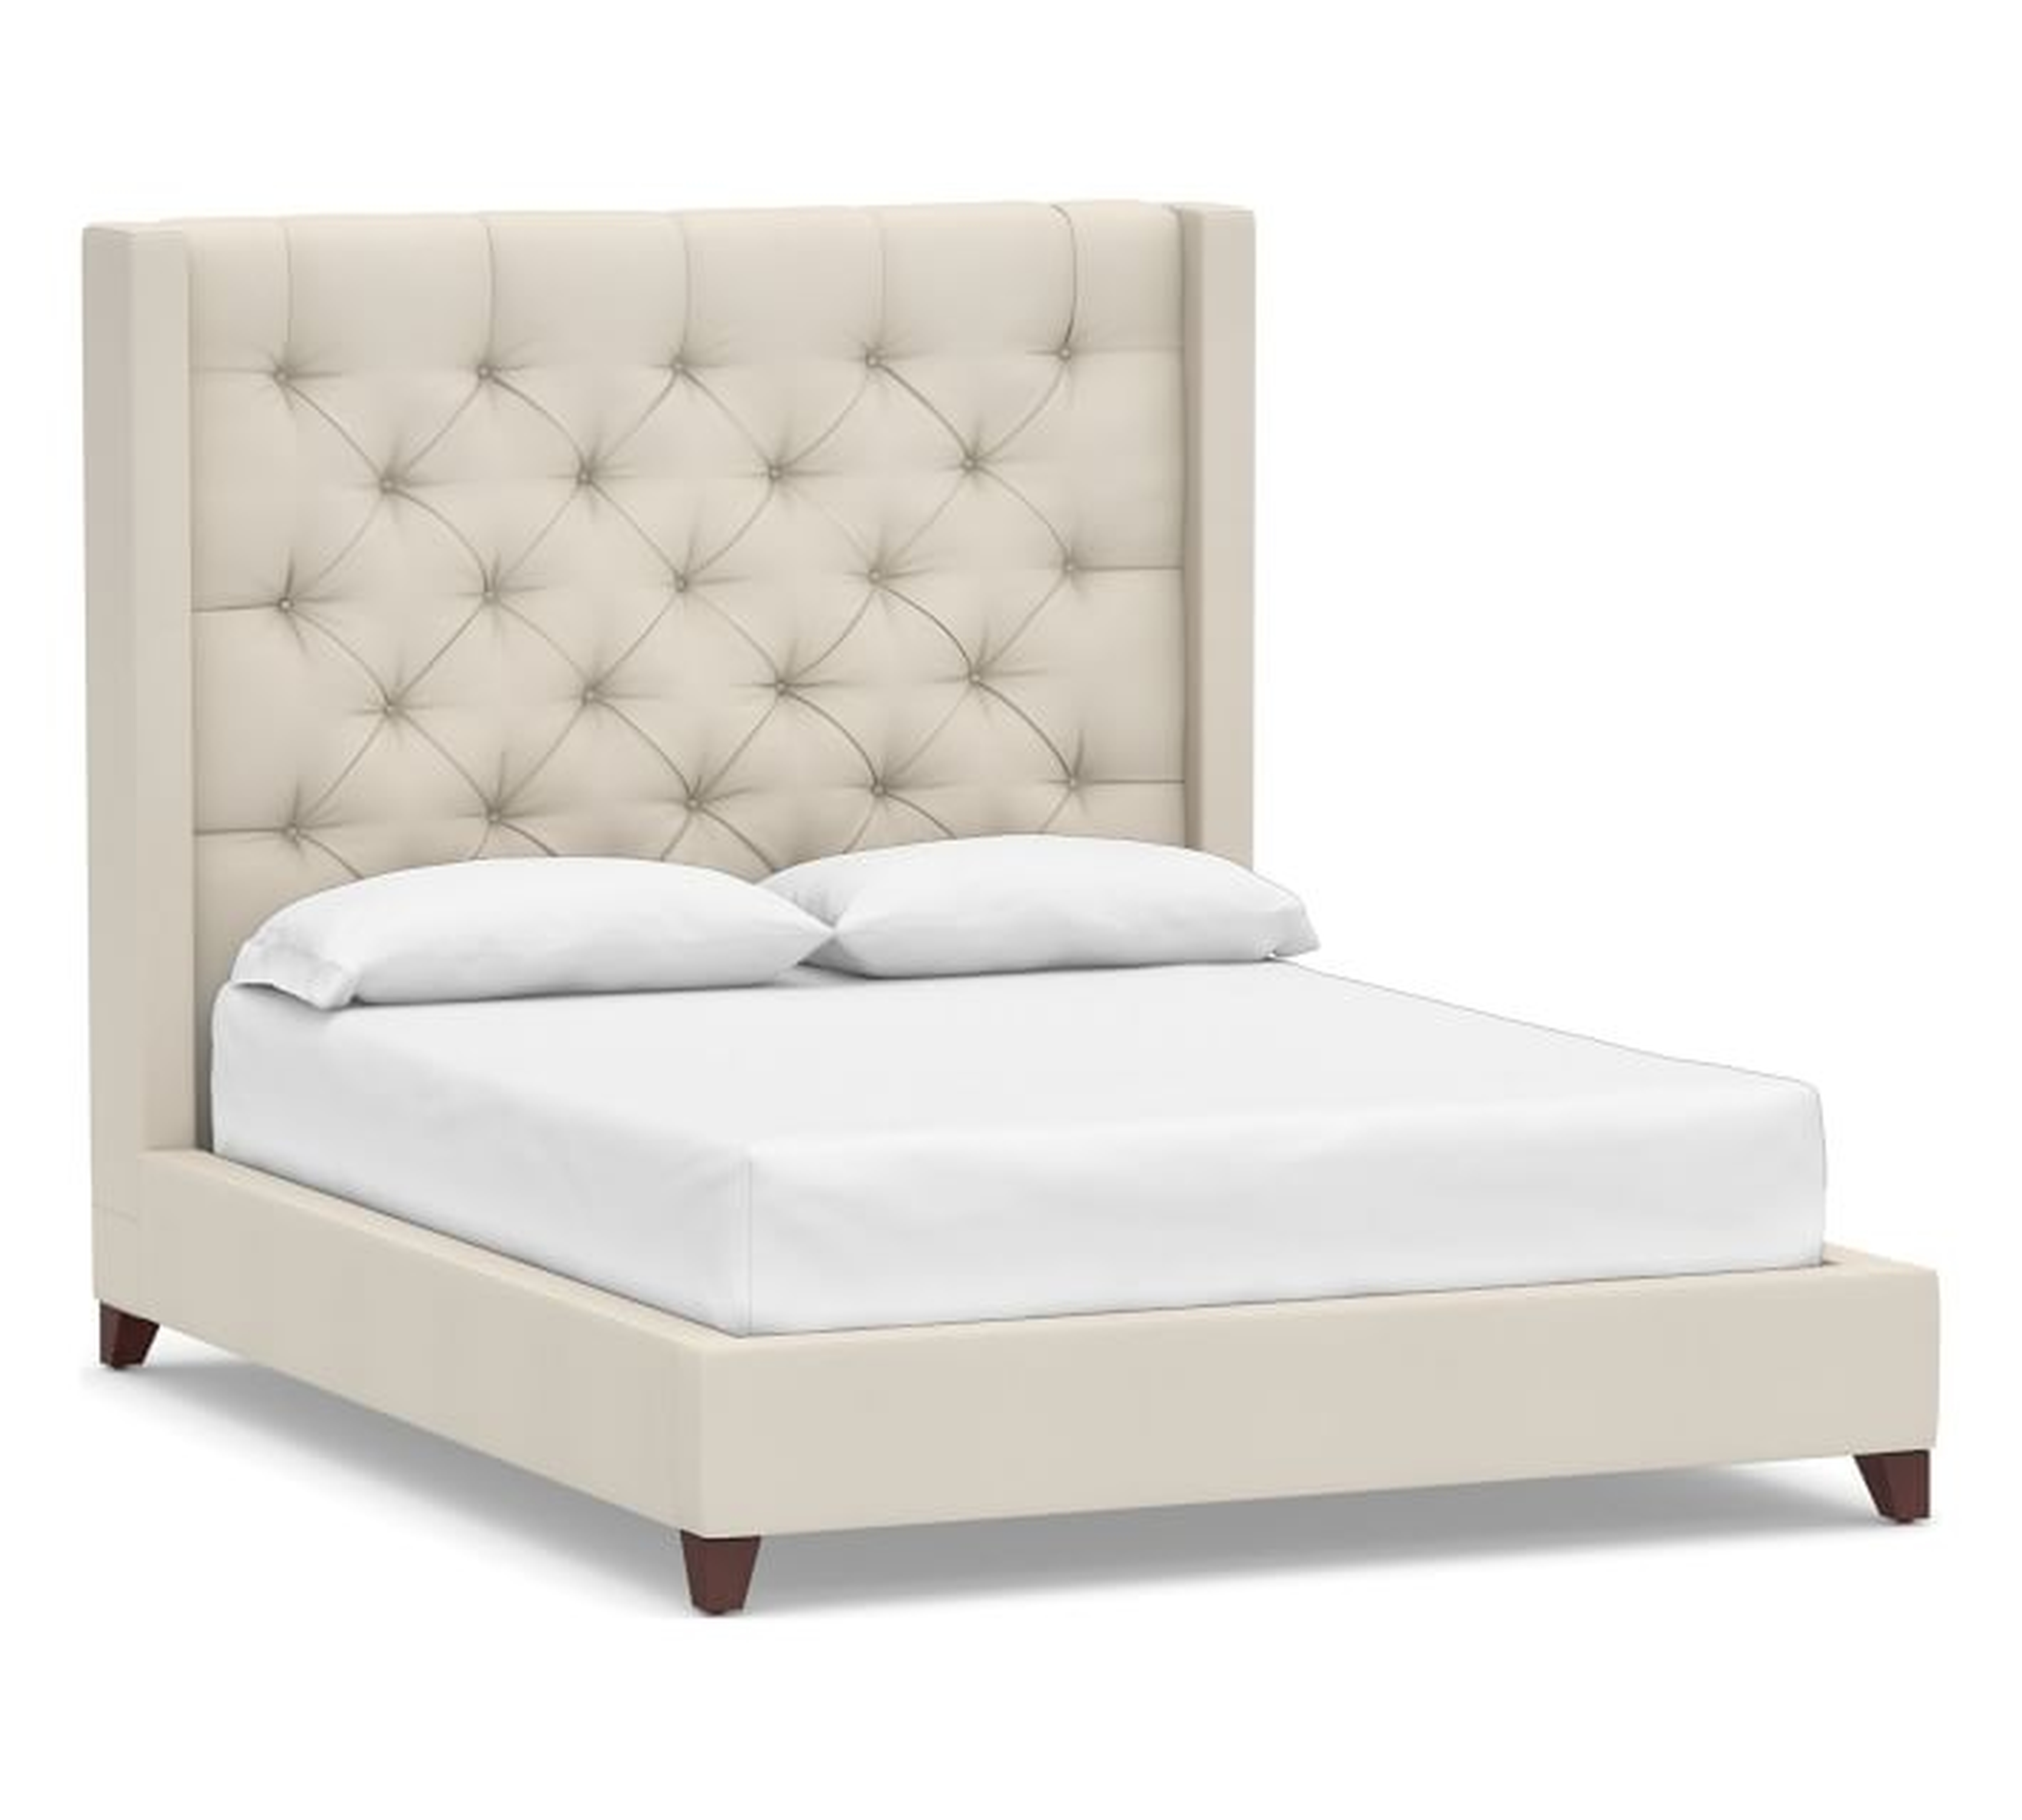 Harper Upholstered Tufted Tall Bed without Nailheads, King, Twill Cream - Pottery Barn